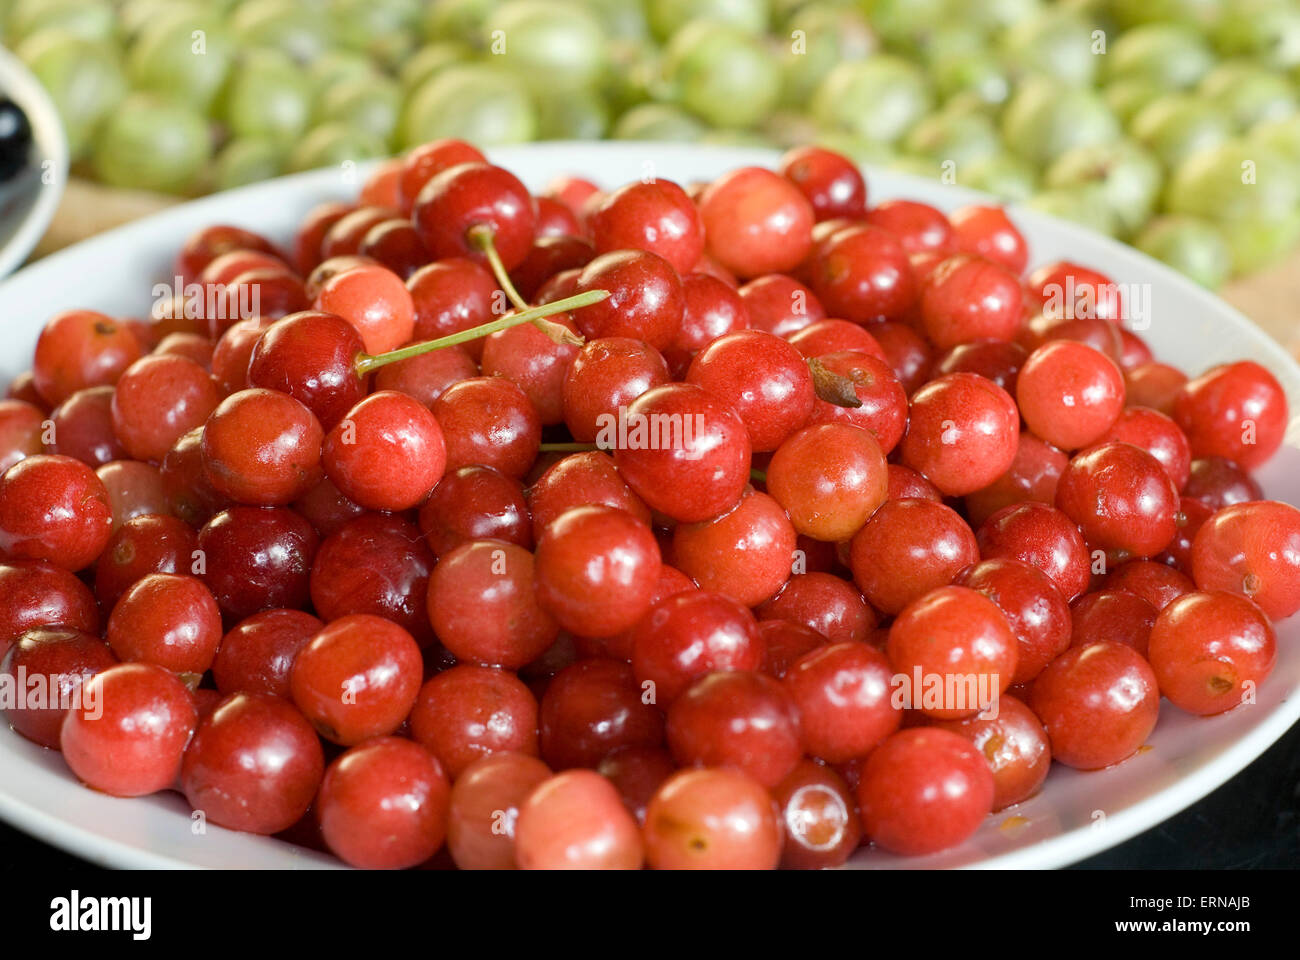 A bowl of red cherries with green gooseberries behind Stock Photo